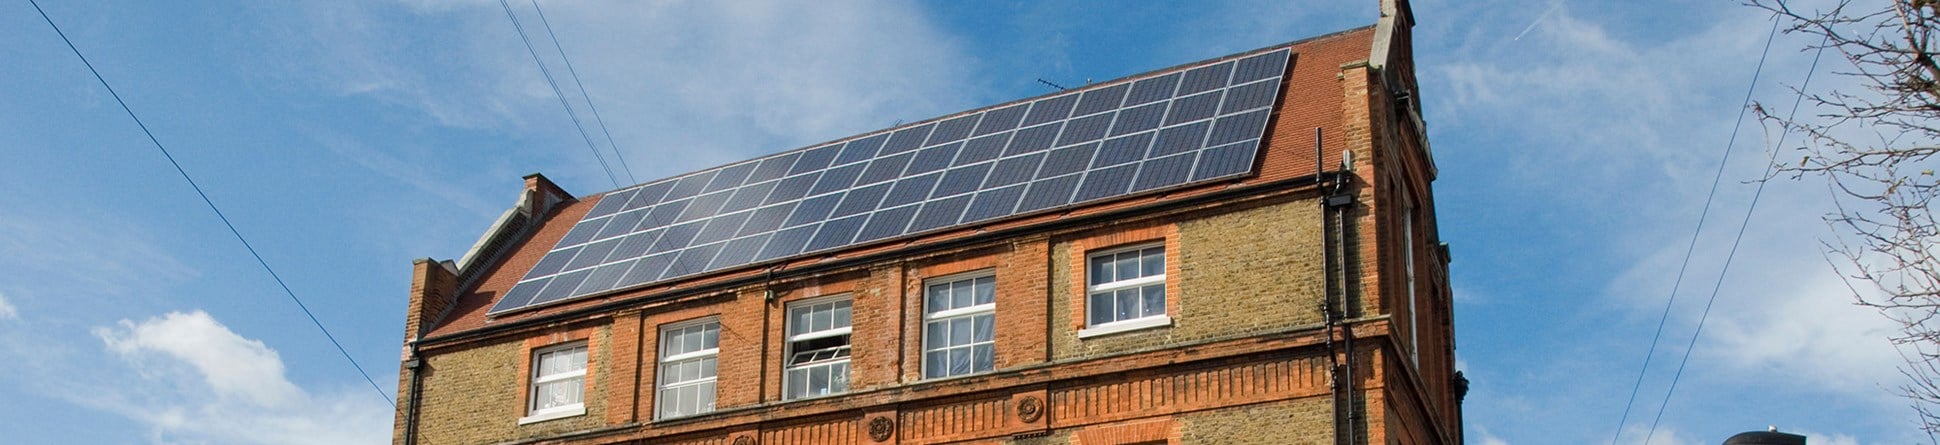 Solar panels on the red tile roof of a brick building.